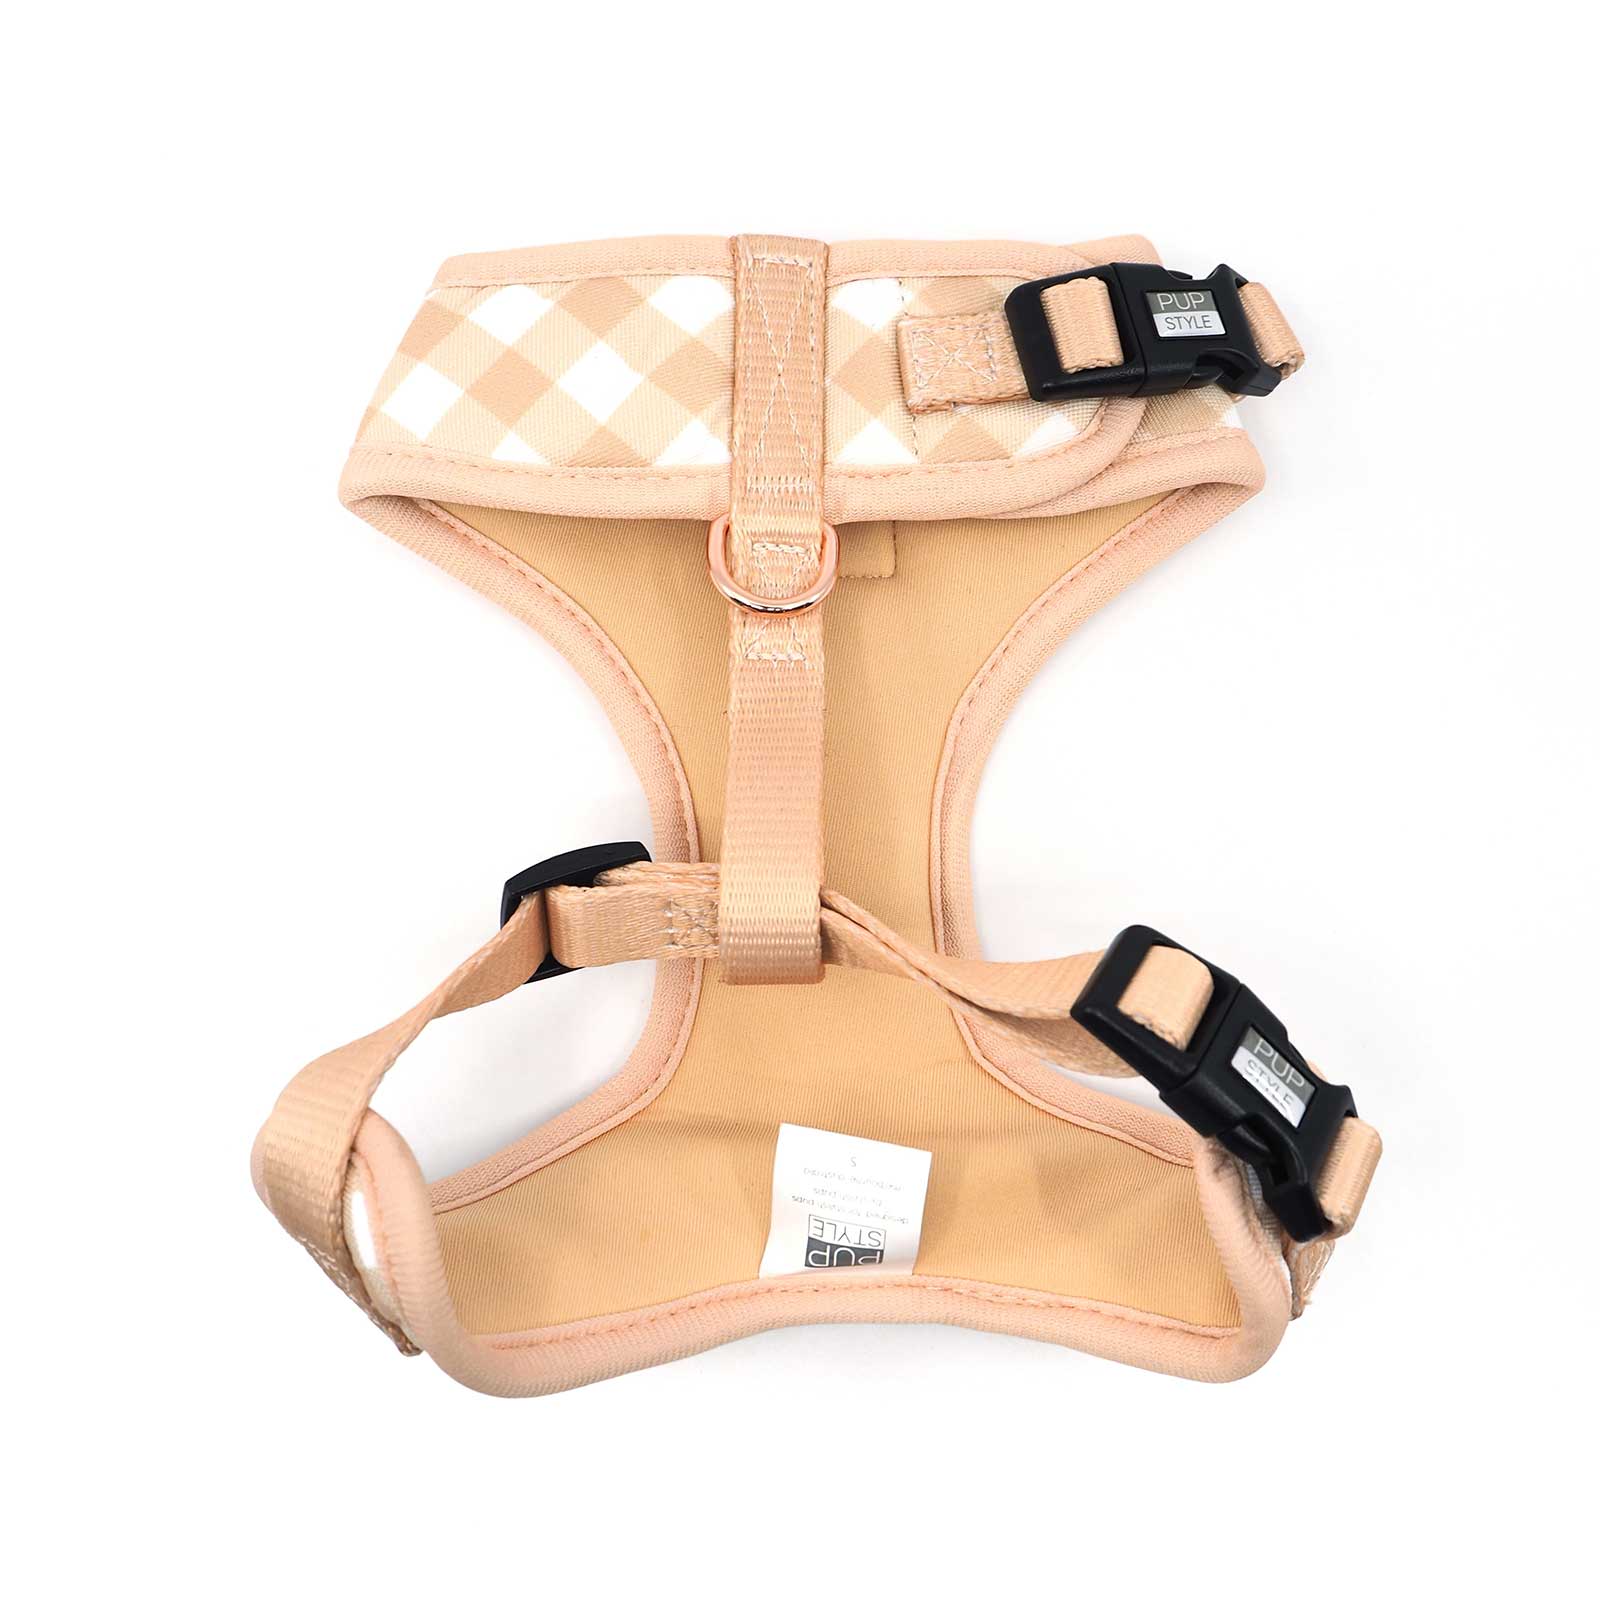 Pupstyle Dog Harness Creme Brulee